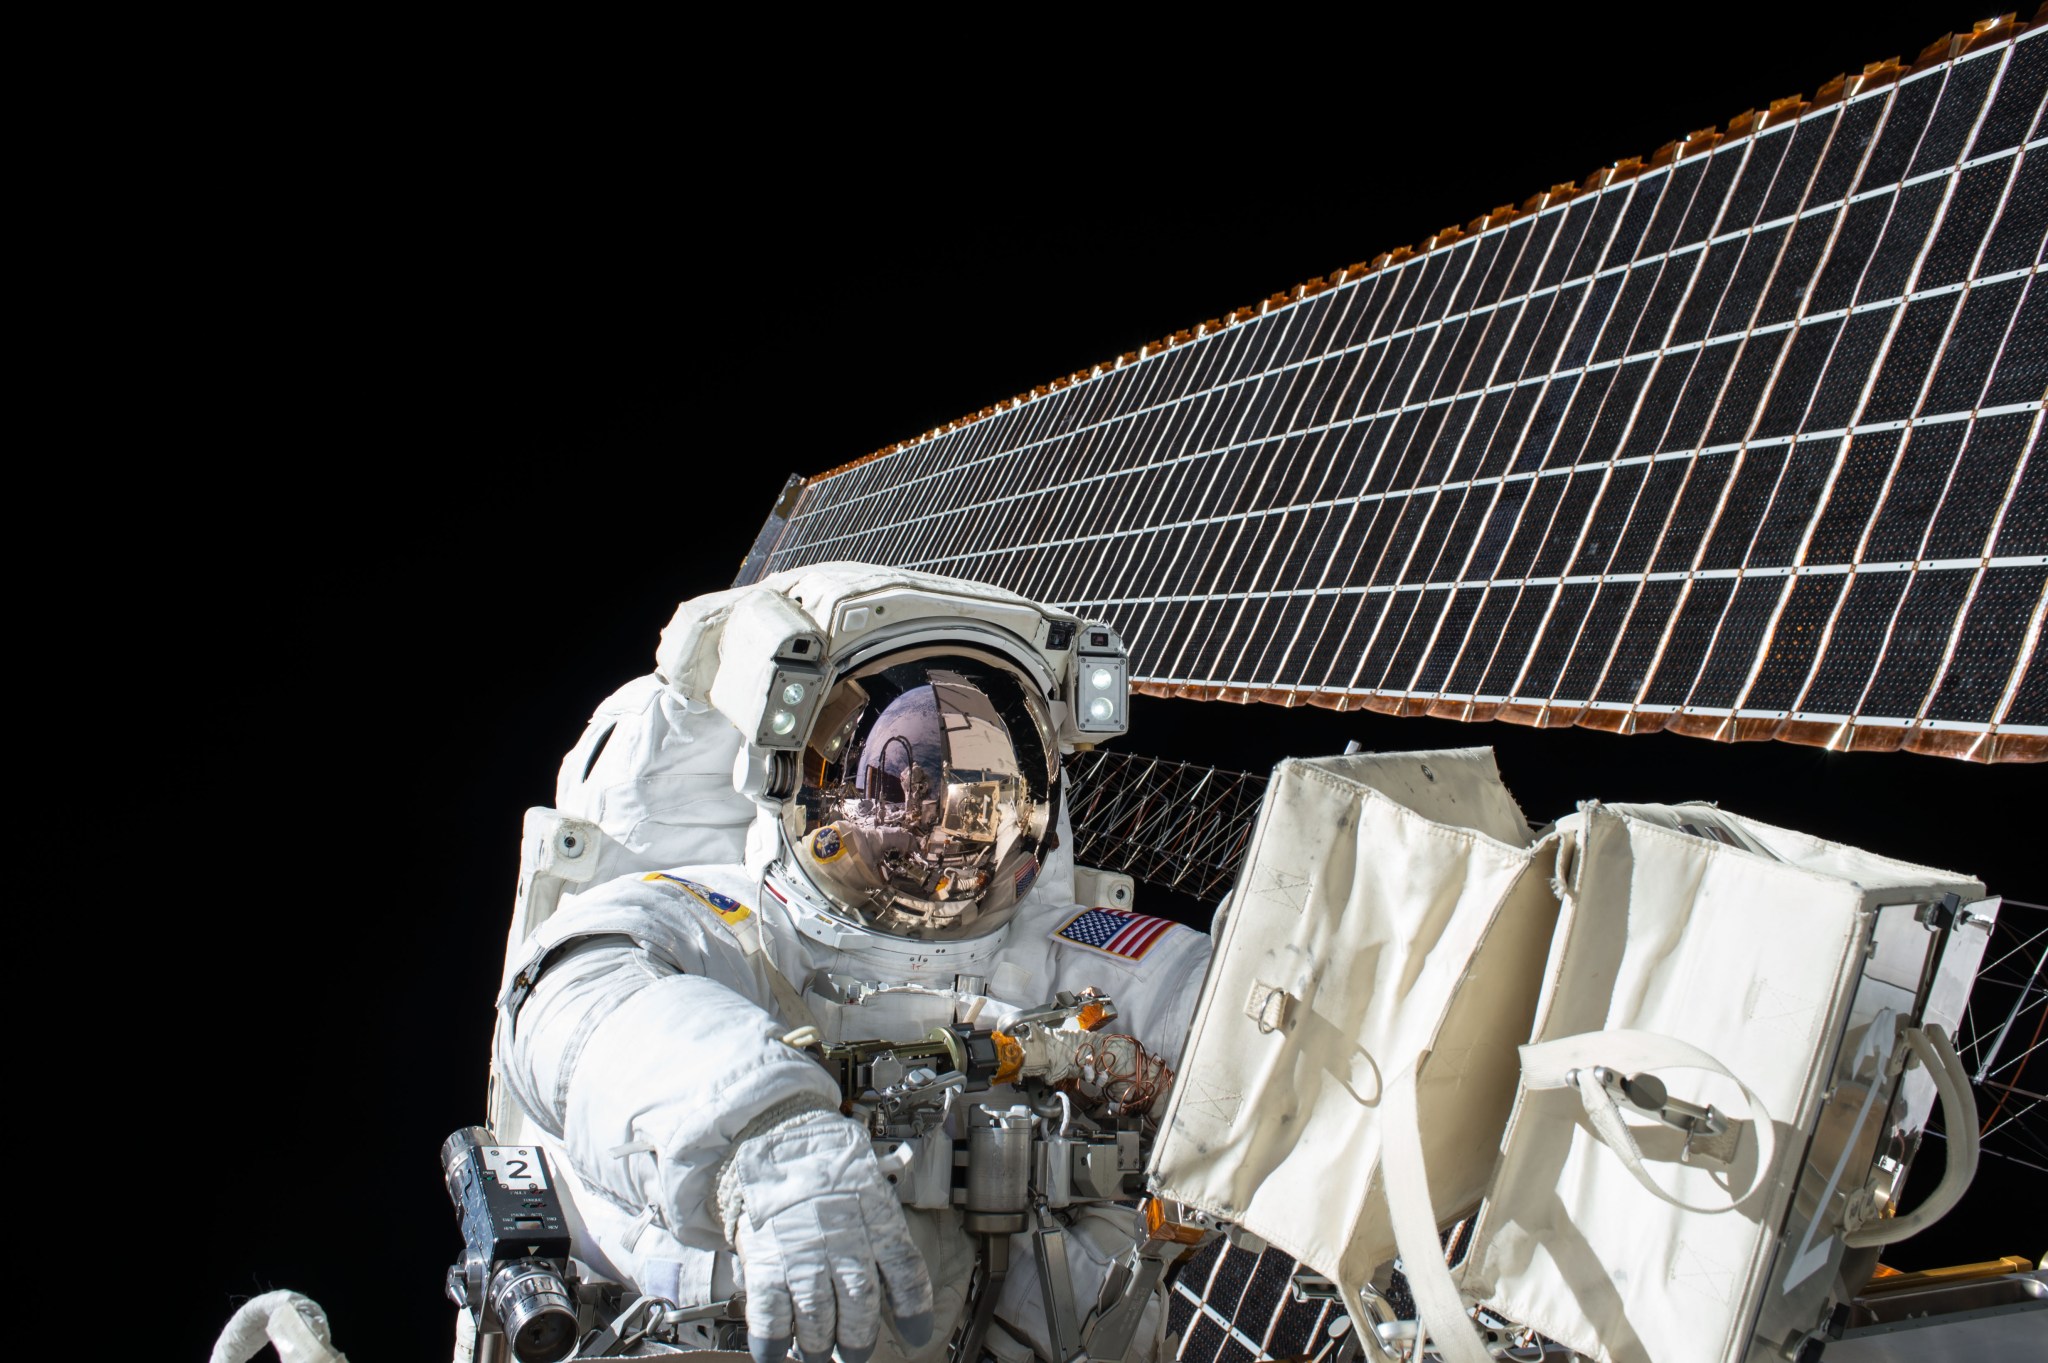 Astronaut in spacesuit outside International Space Station with solar array in background